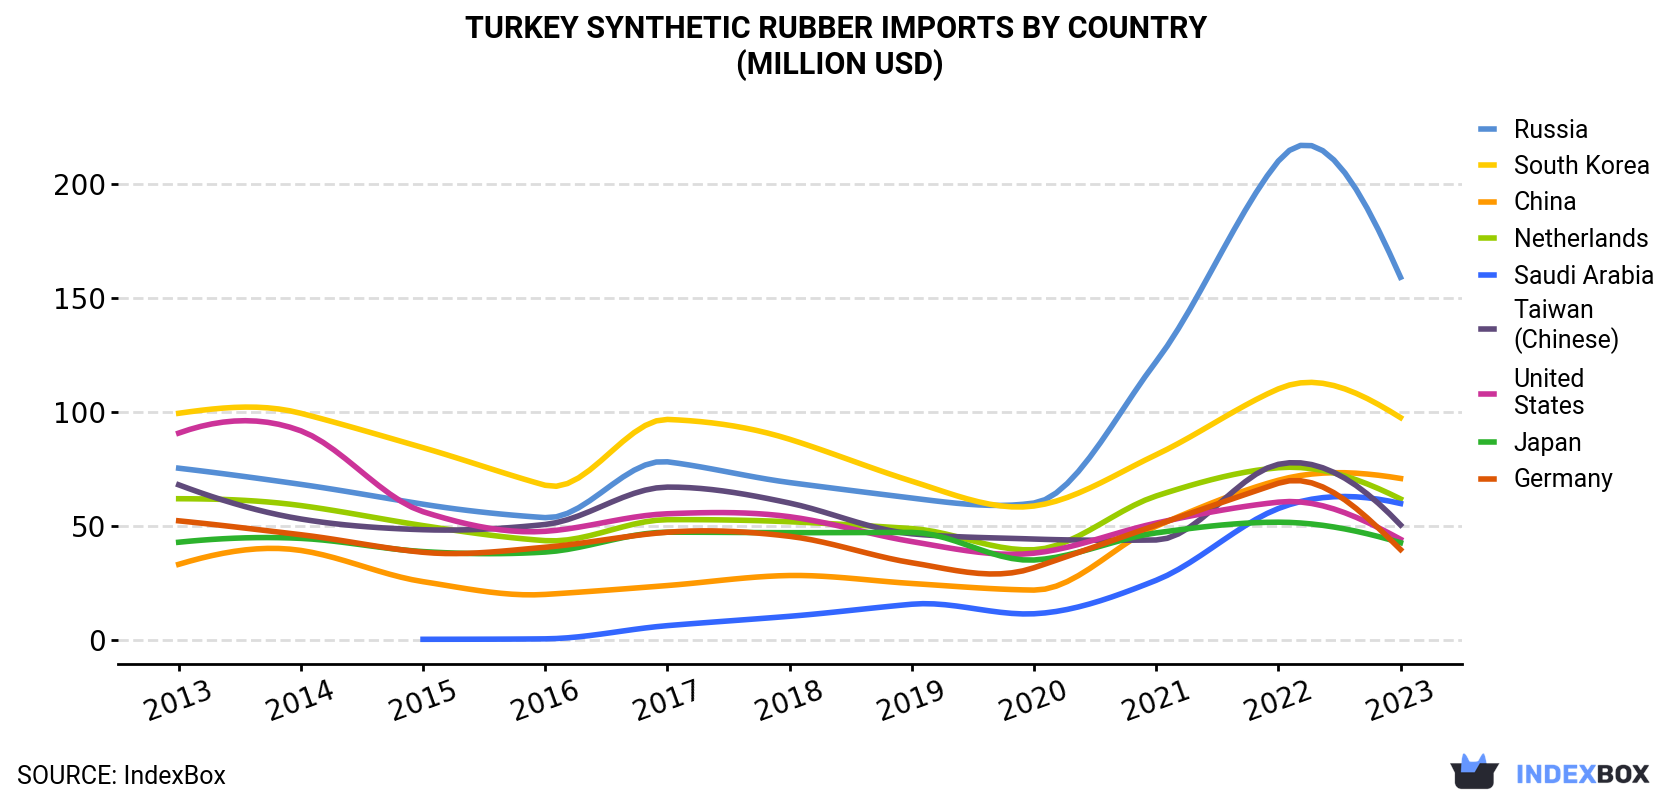 Turkey Synthetic Rubber Imports By Country (Million USD)